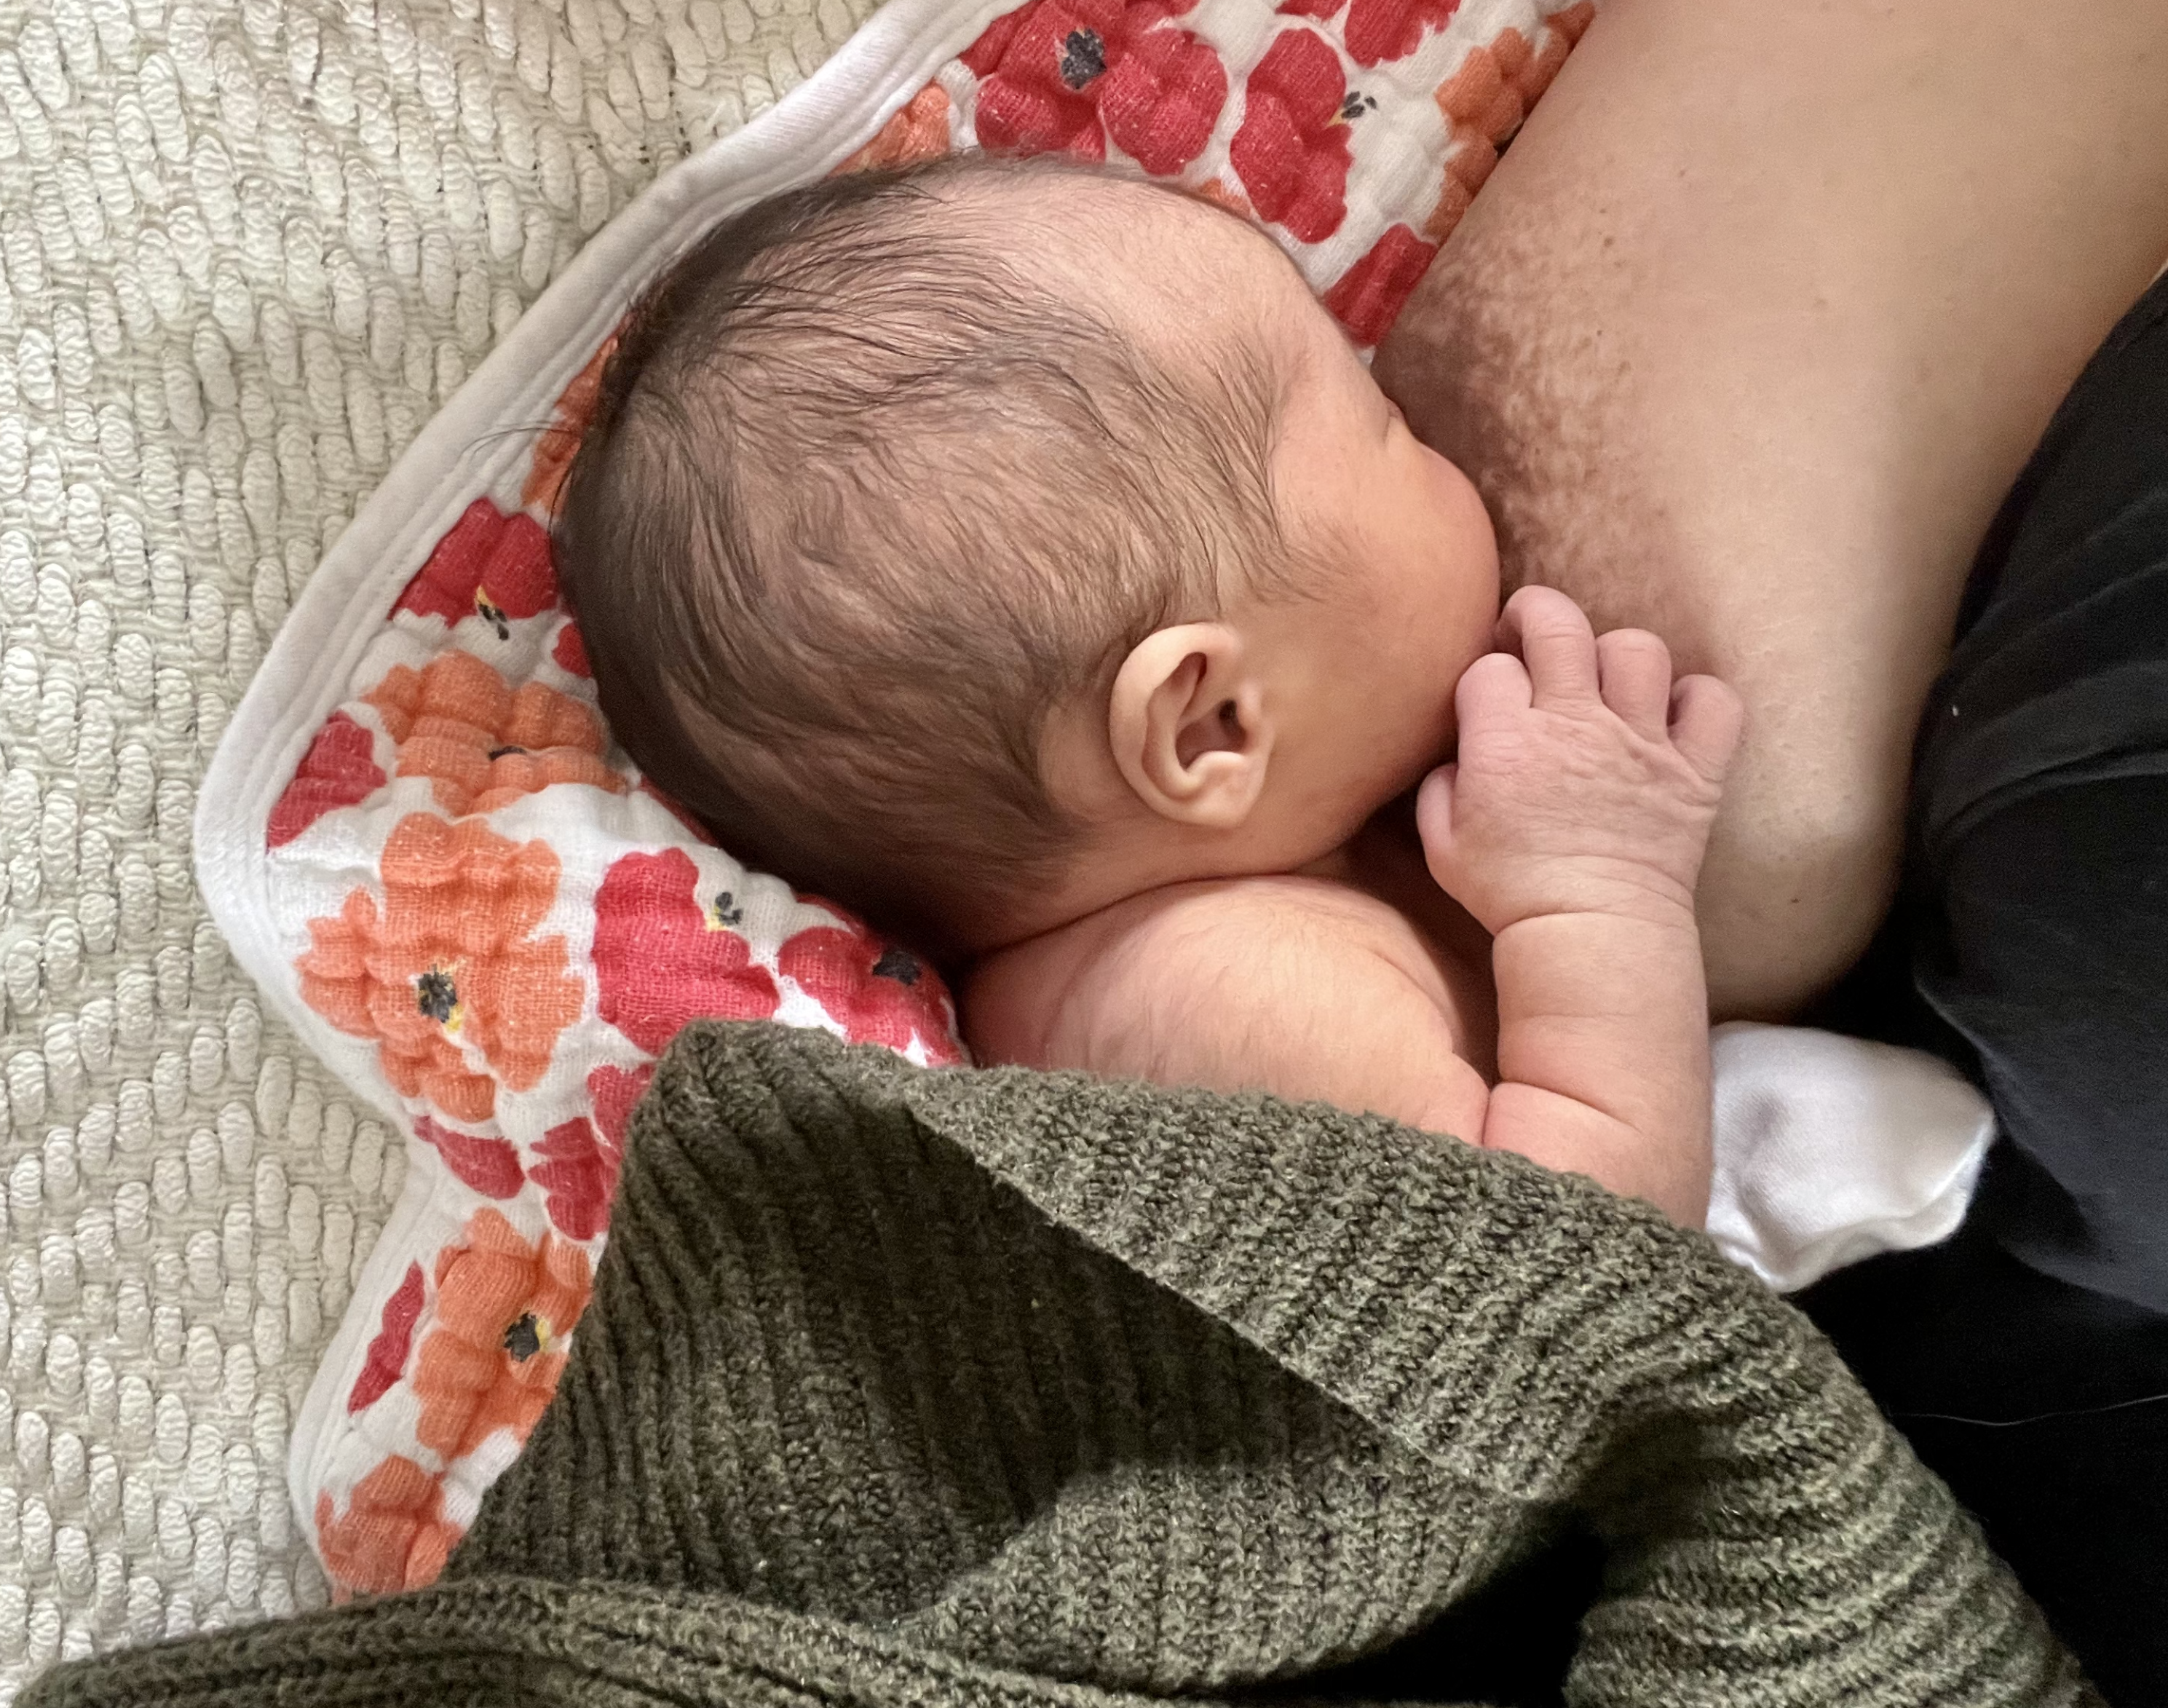 When Is It Too Late to Start Breastfeeding?